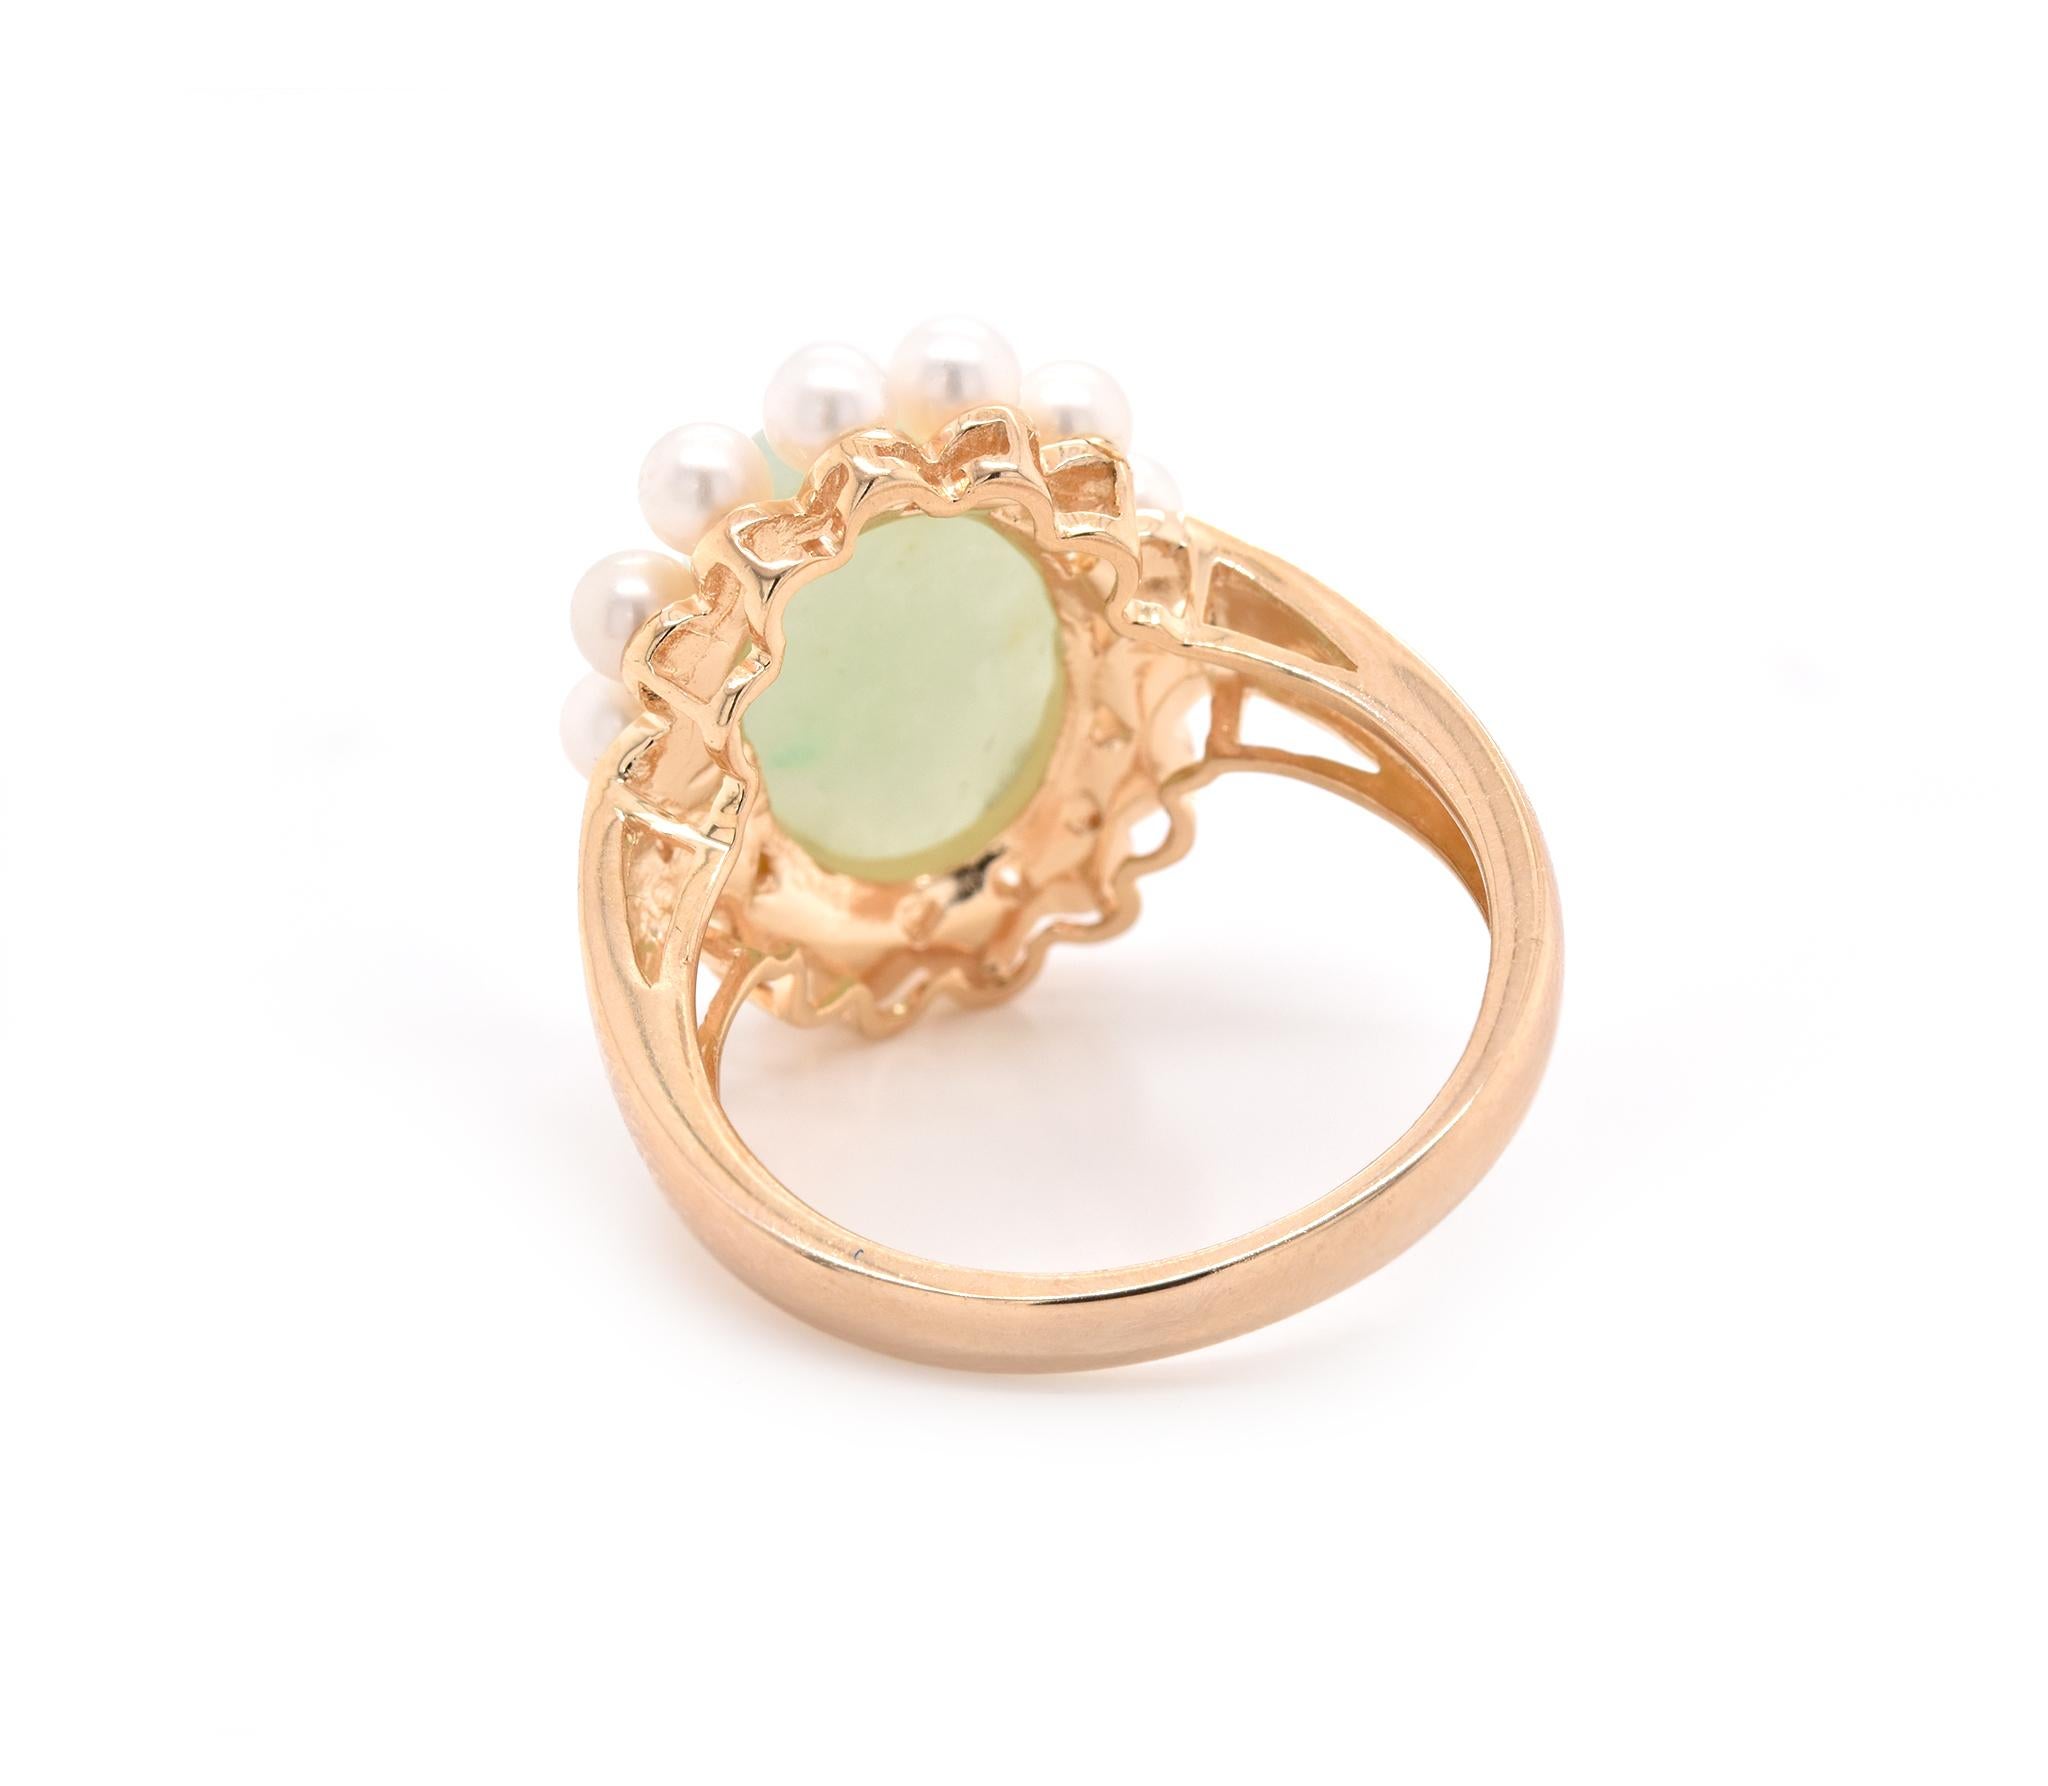 Women's or Men's 14 Karat Yellow Gold Vintage Cabochon Jade and Seed Pearl RIng